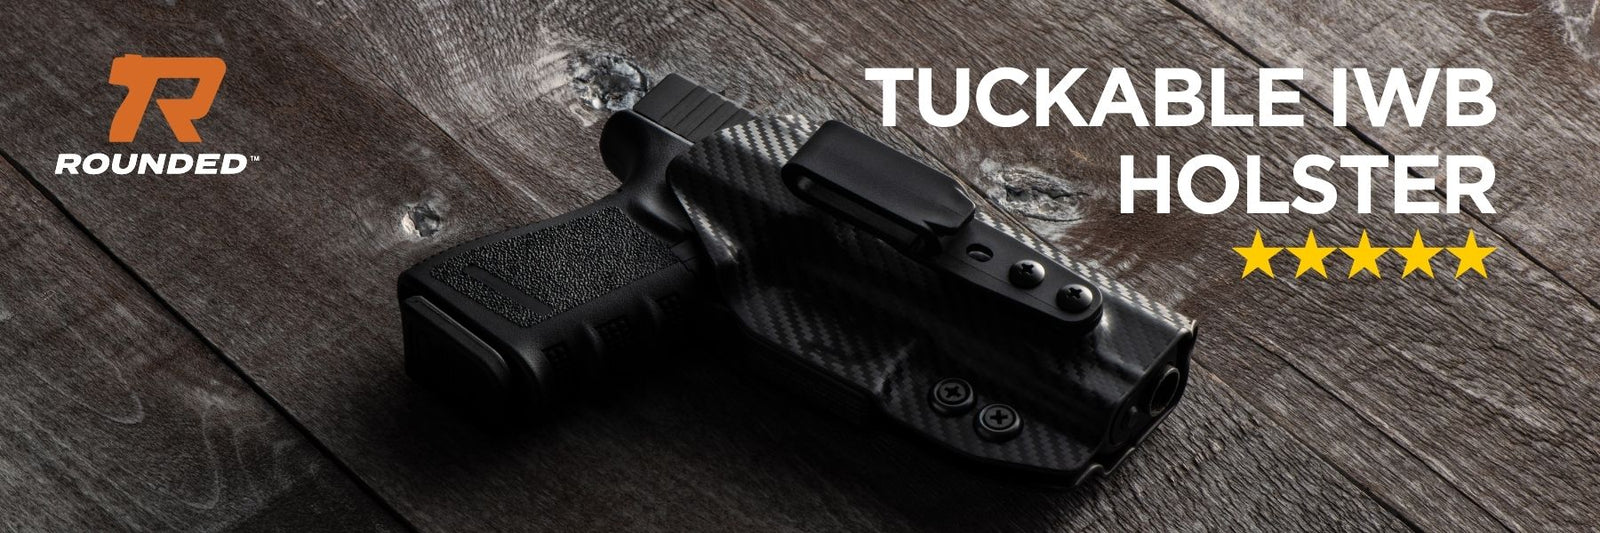 Rounded Gear - KYDEX Holsters, Packs & EDC Gear for Today's Gun Owner